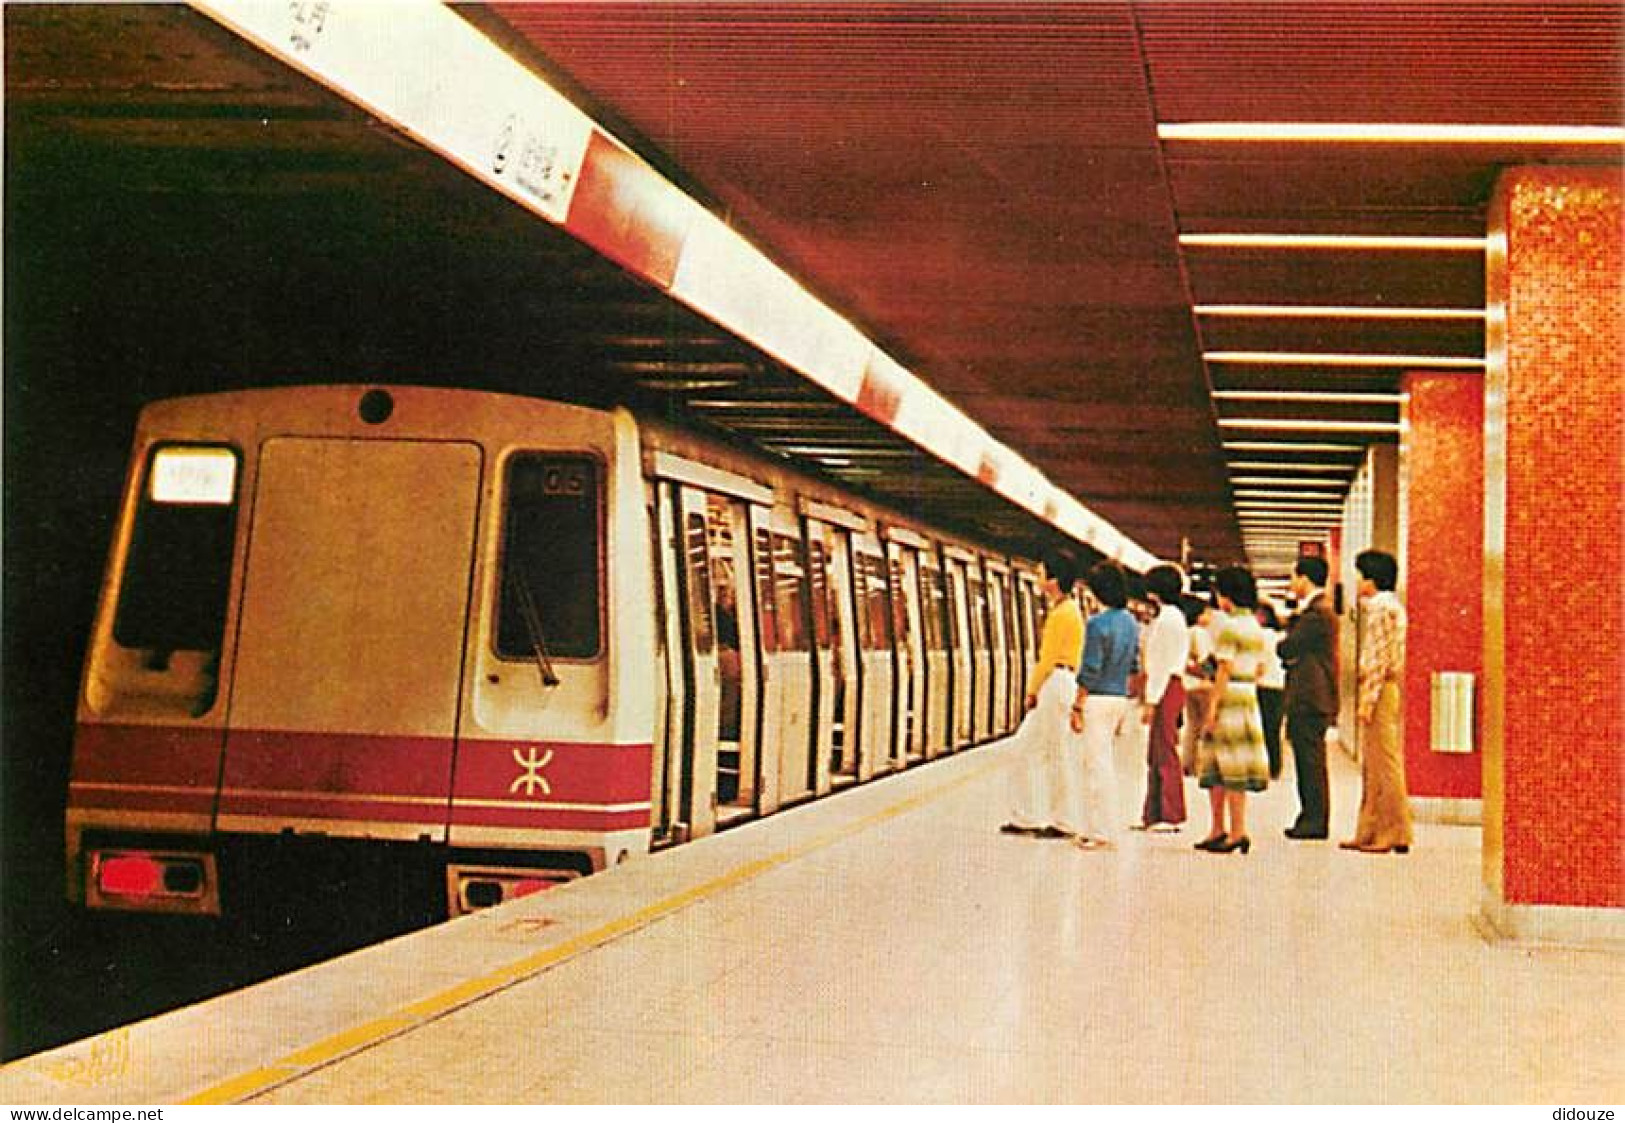 Trains - Métro - Hong Kong - Hong Kong Has Marked Its Entry Into The 1980S With A Significant New Achievement: The Métro - Metro